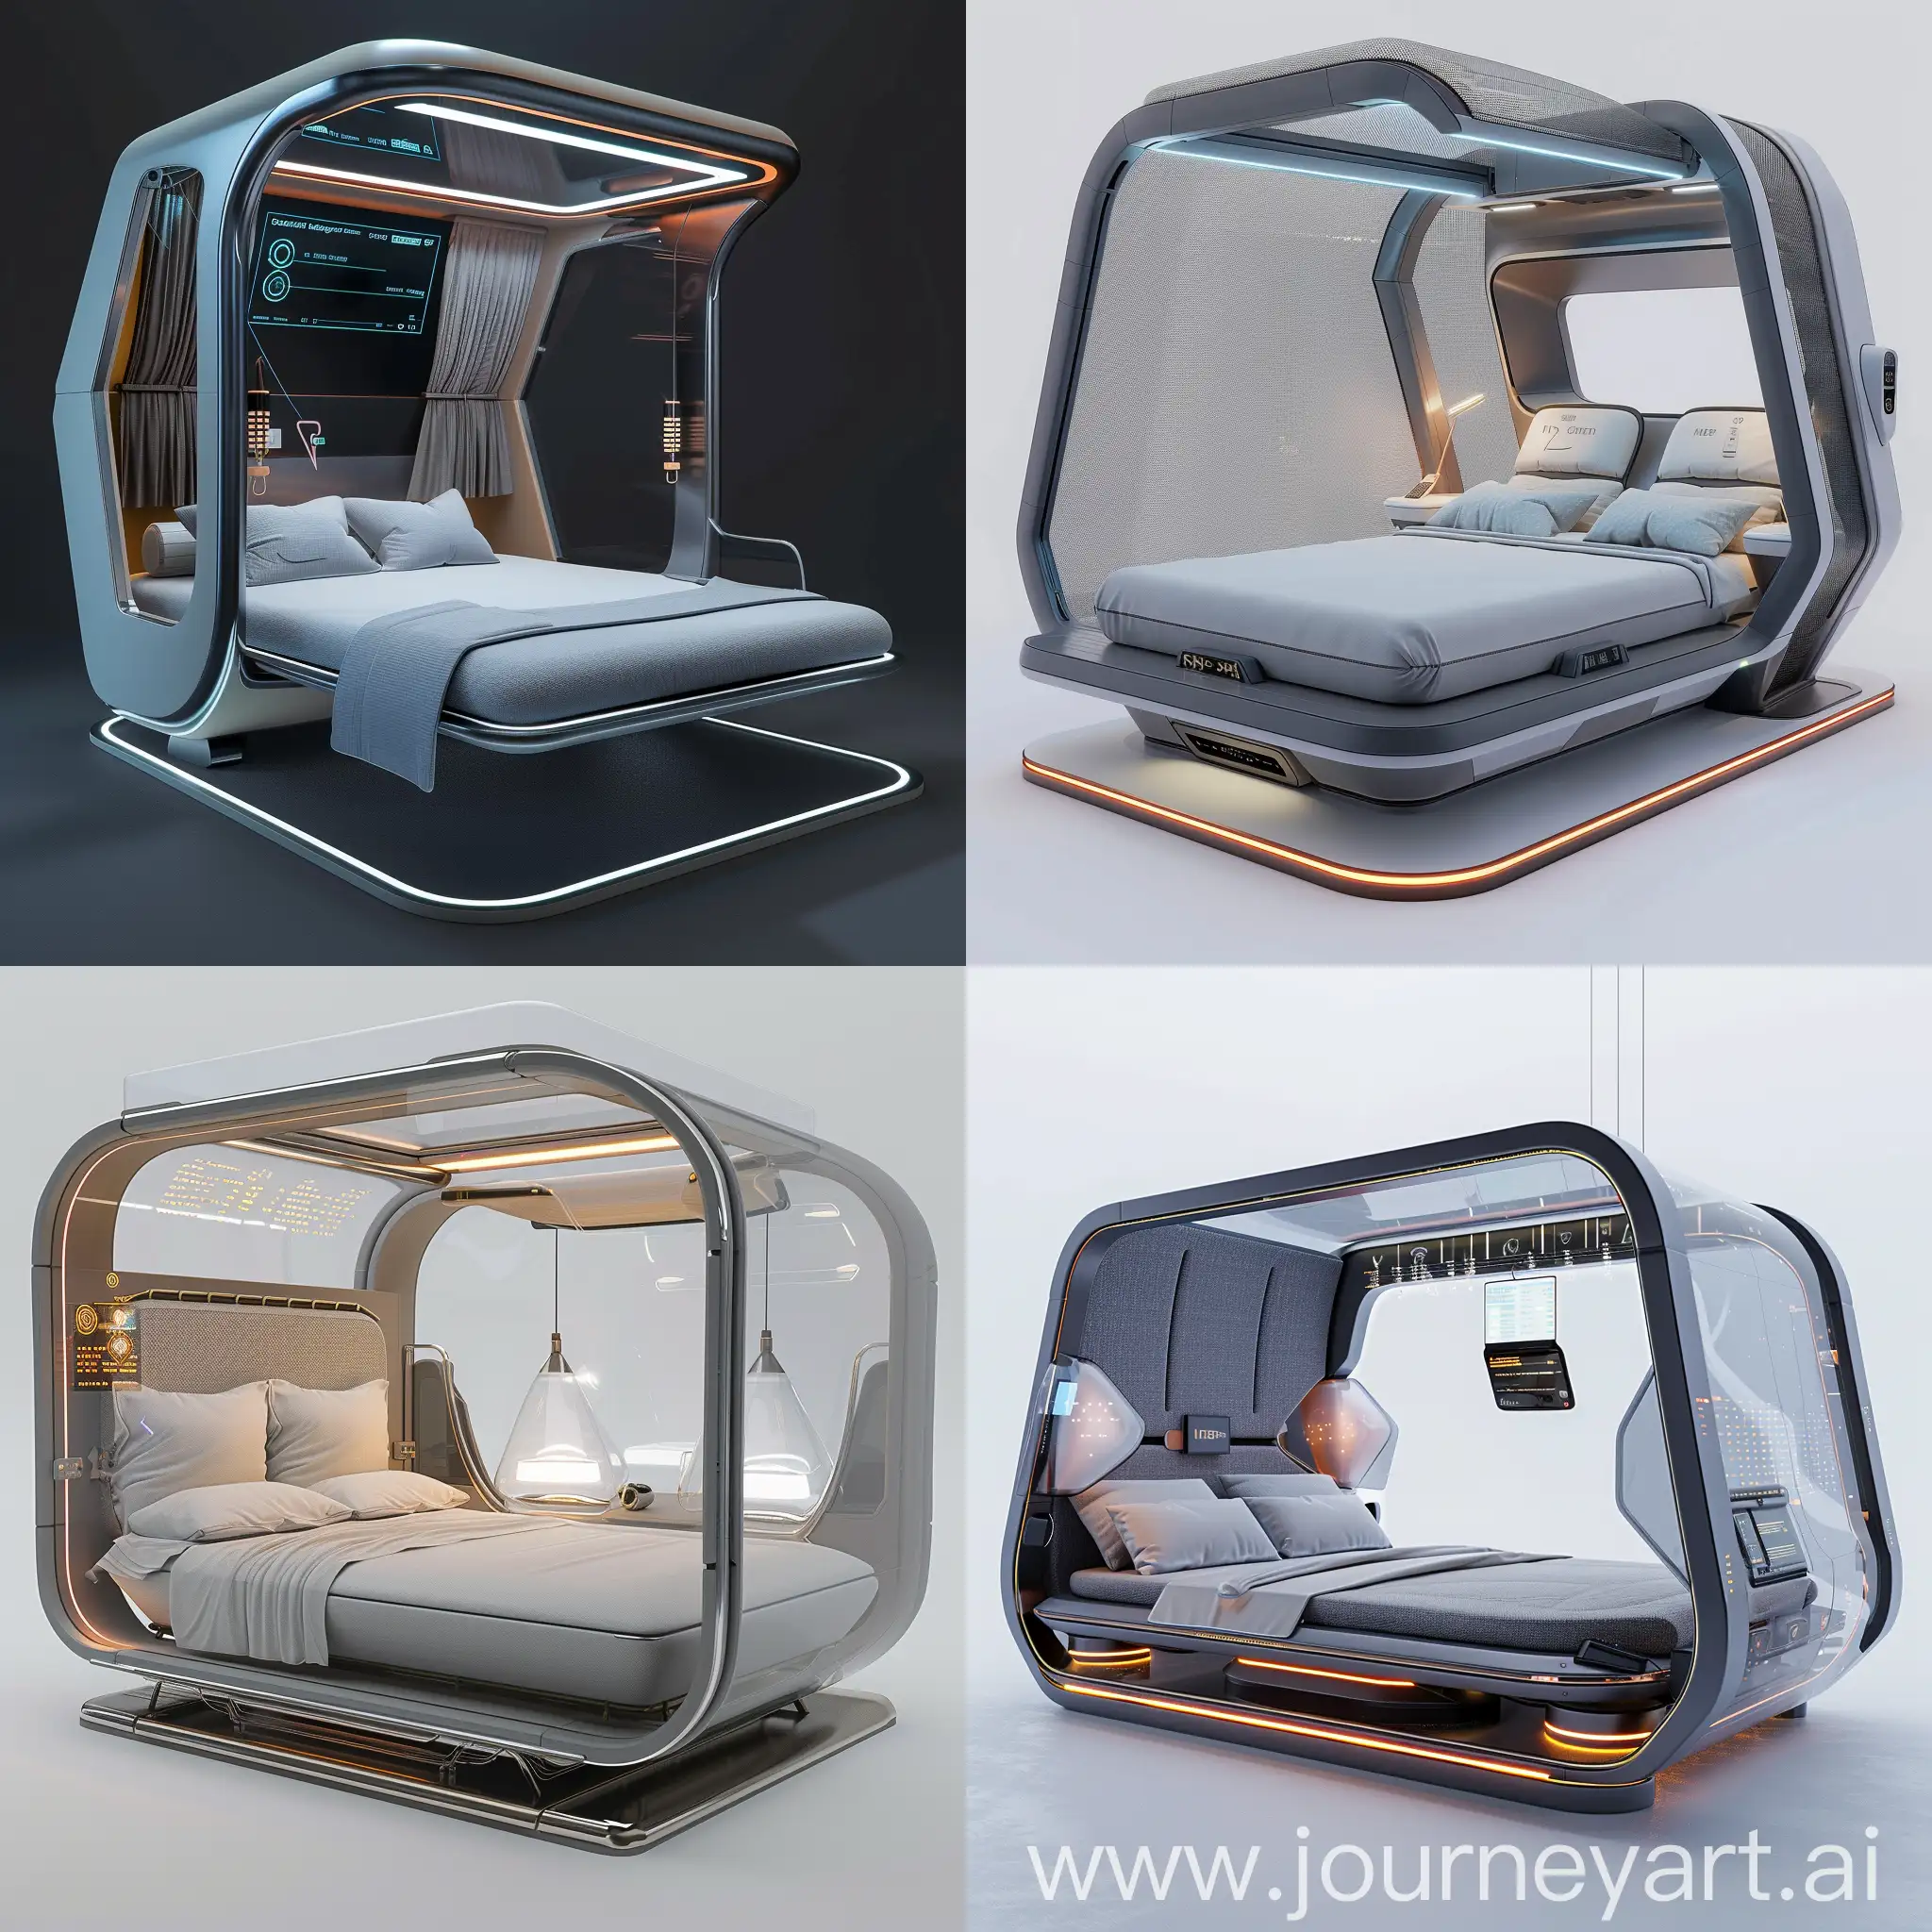 Futuristic bed, in futuristic style, Biometric Sensors, Smart Fabric, Climate Control System, Adjustable Firmness, Embedded Speakers, Wireless Charging, AI Sleep Coach, Integrated Lighting, Massage Functionality, Automatic Adjustment, Smart Headboard Display, Voice Control Integration, Augmented Reality Projection, Embedded Ambient Sensors, Wireless Connectivity Hub, Gesture Control Interface, Biometric Authentication, Integrated Sleep Tracking Cameras, Modular Design Elements, Self-Cleaning Materials, Carbon Fiber Frame, Aerogel Insulation, Graphene Foam, Hollow-core Structure, Air Bladder Technology, Titanium Alloy Springs, Memory Foam Alternatives, Nano-fiber Fabric Cover, Inflatable Support Pods, Multi-layered Composite Construction, Aluminum Alloy Frame, Carbon Fiber Accents, Slim Profile Headboard, Foldable Design, Magnetic Attachment Panels, Transparent Canopy, Fabric Accent Panels, LED Accent Lighting, Integrated Storage Solutions, Minimalist Design Aesthetics, unreal engine 5 --stylize 1000